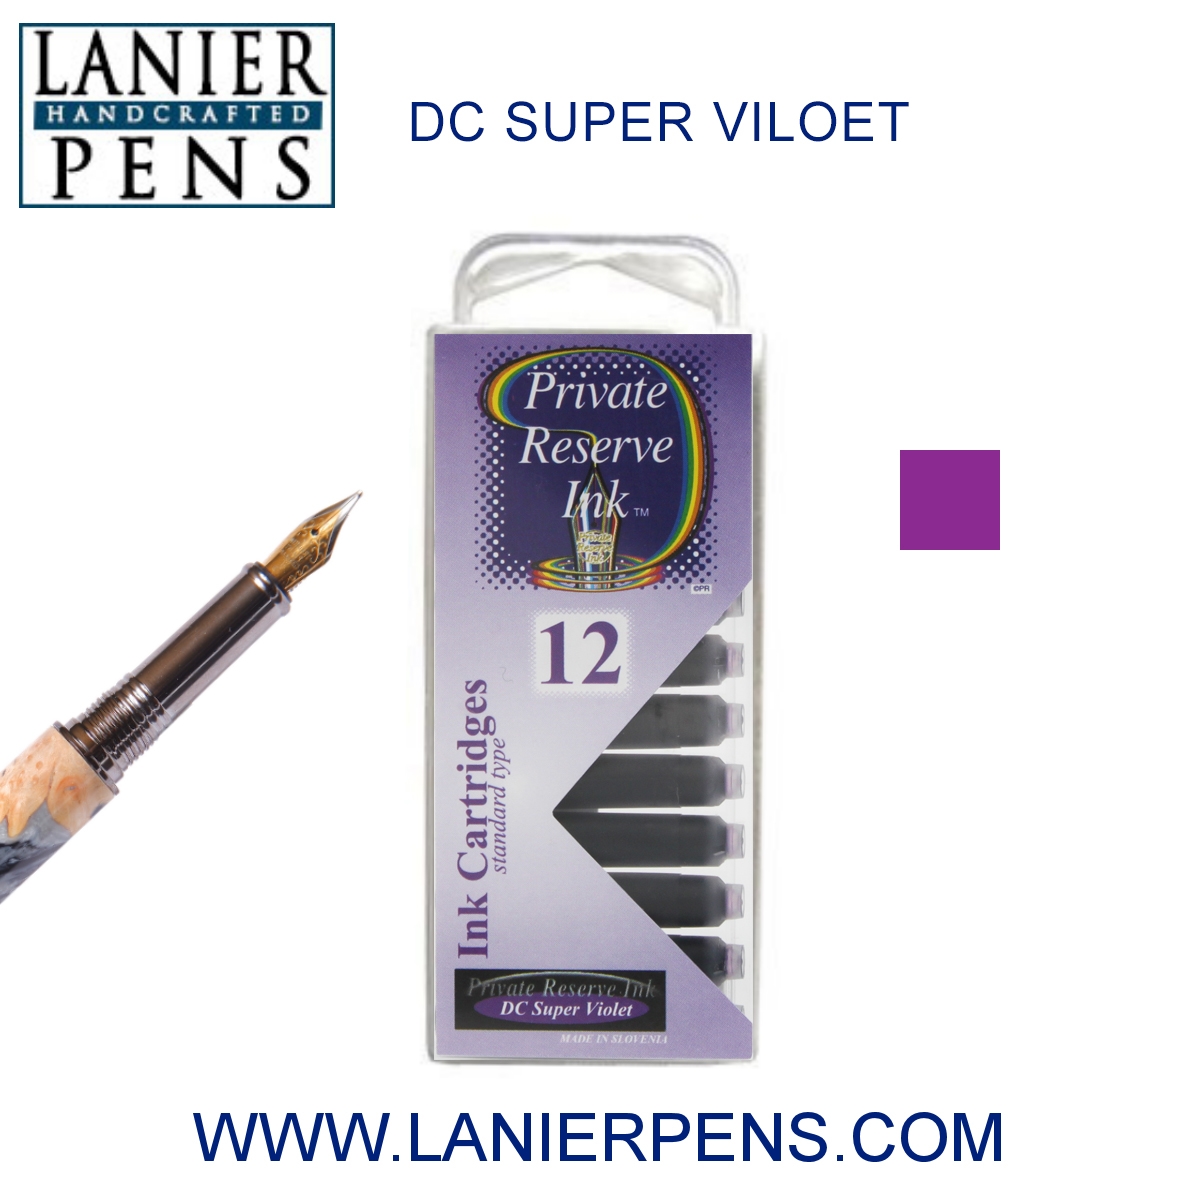 12 Pack - Private Reserve Ink, Universal Fountain Pen Ink Cartridges Clear Case, DC Super Violet by Lanier Pens